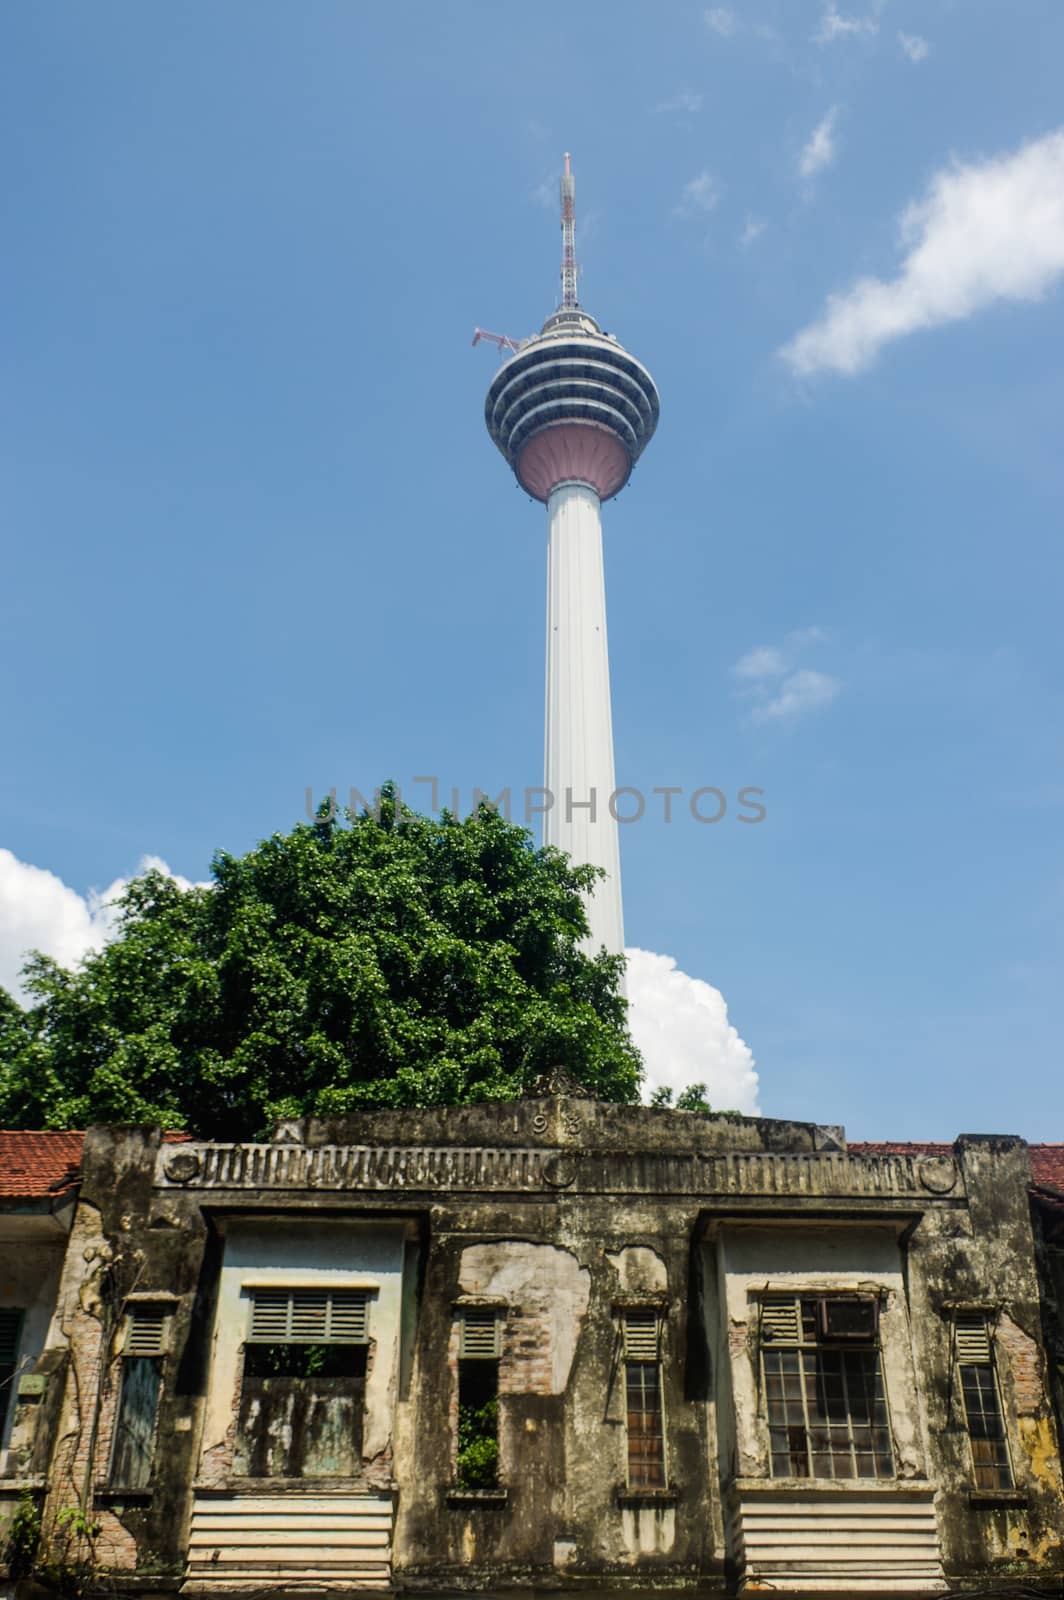 KUALA LUMPUR, MALAYSIA - JANUARY 16, 2016: View of Cityscape. KL Tower in background. by evolutionnow